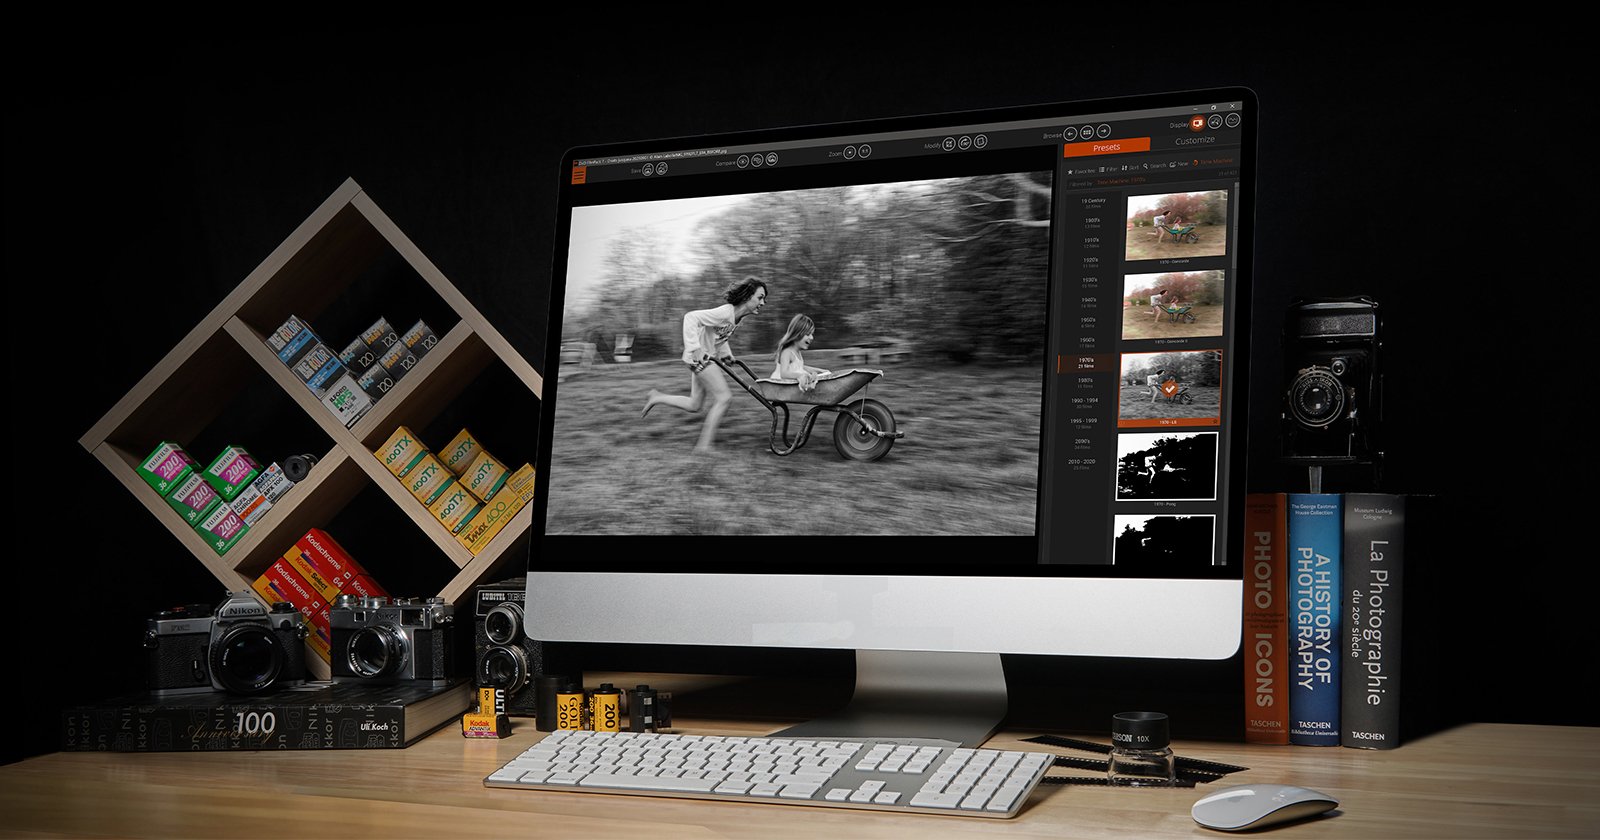 DxO PhotoLab and FilmPack Version 7 Add Powerful New Editing Tools